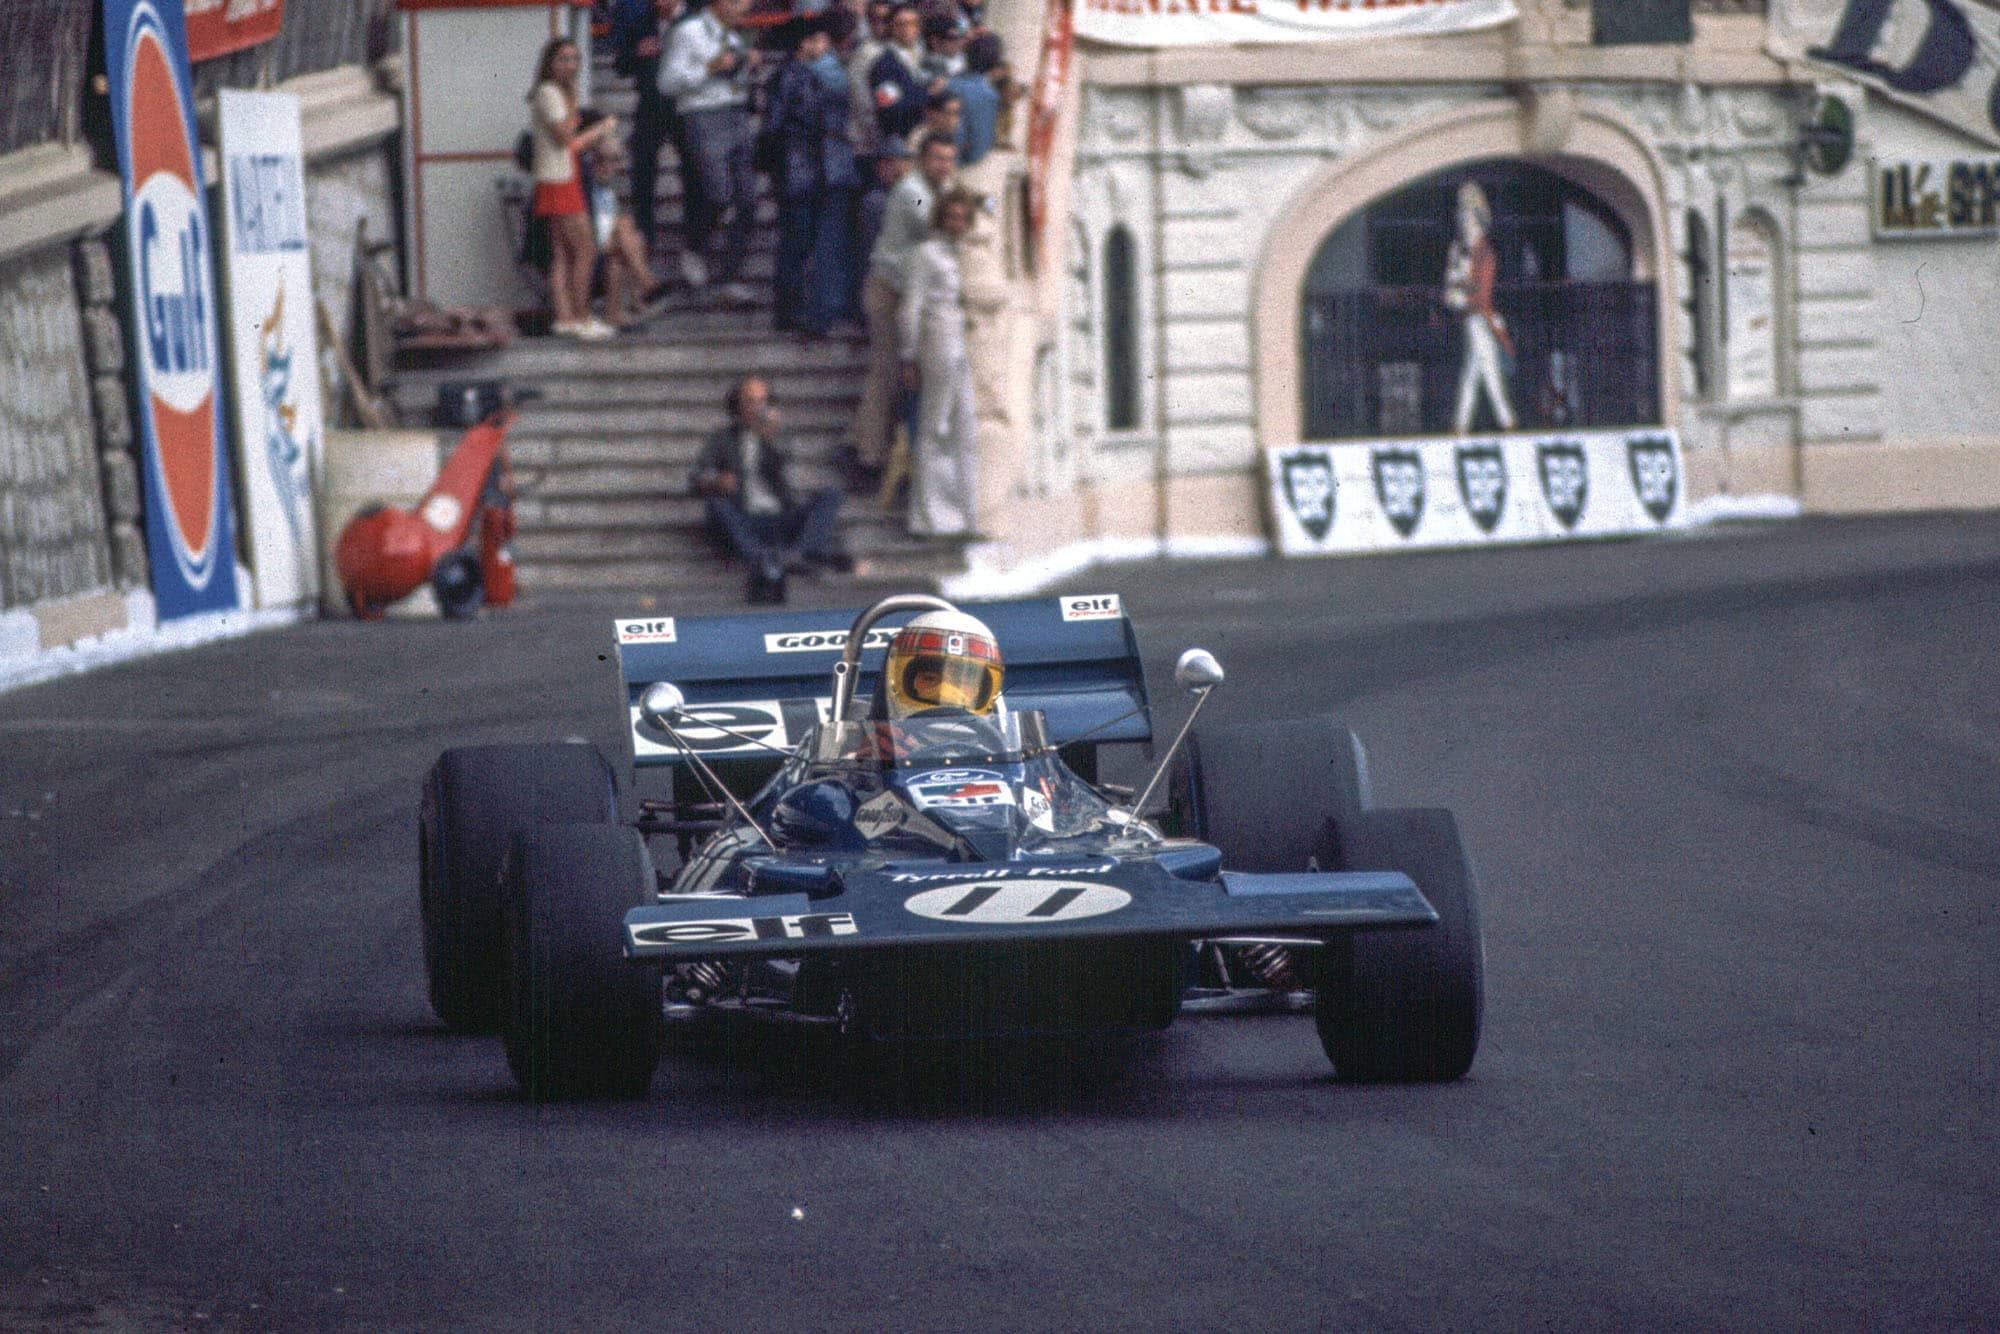 Monaco Grand Prix should be SCRAPPED: Iconic race for the few not the many  is a farce, F1, Sport